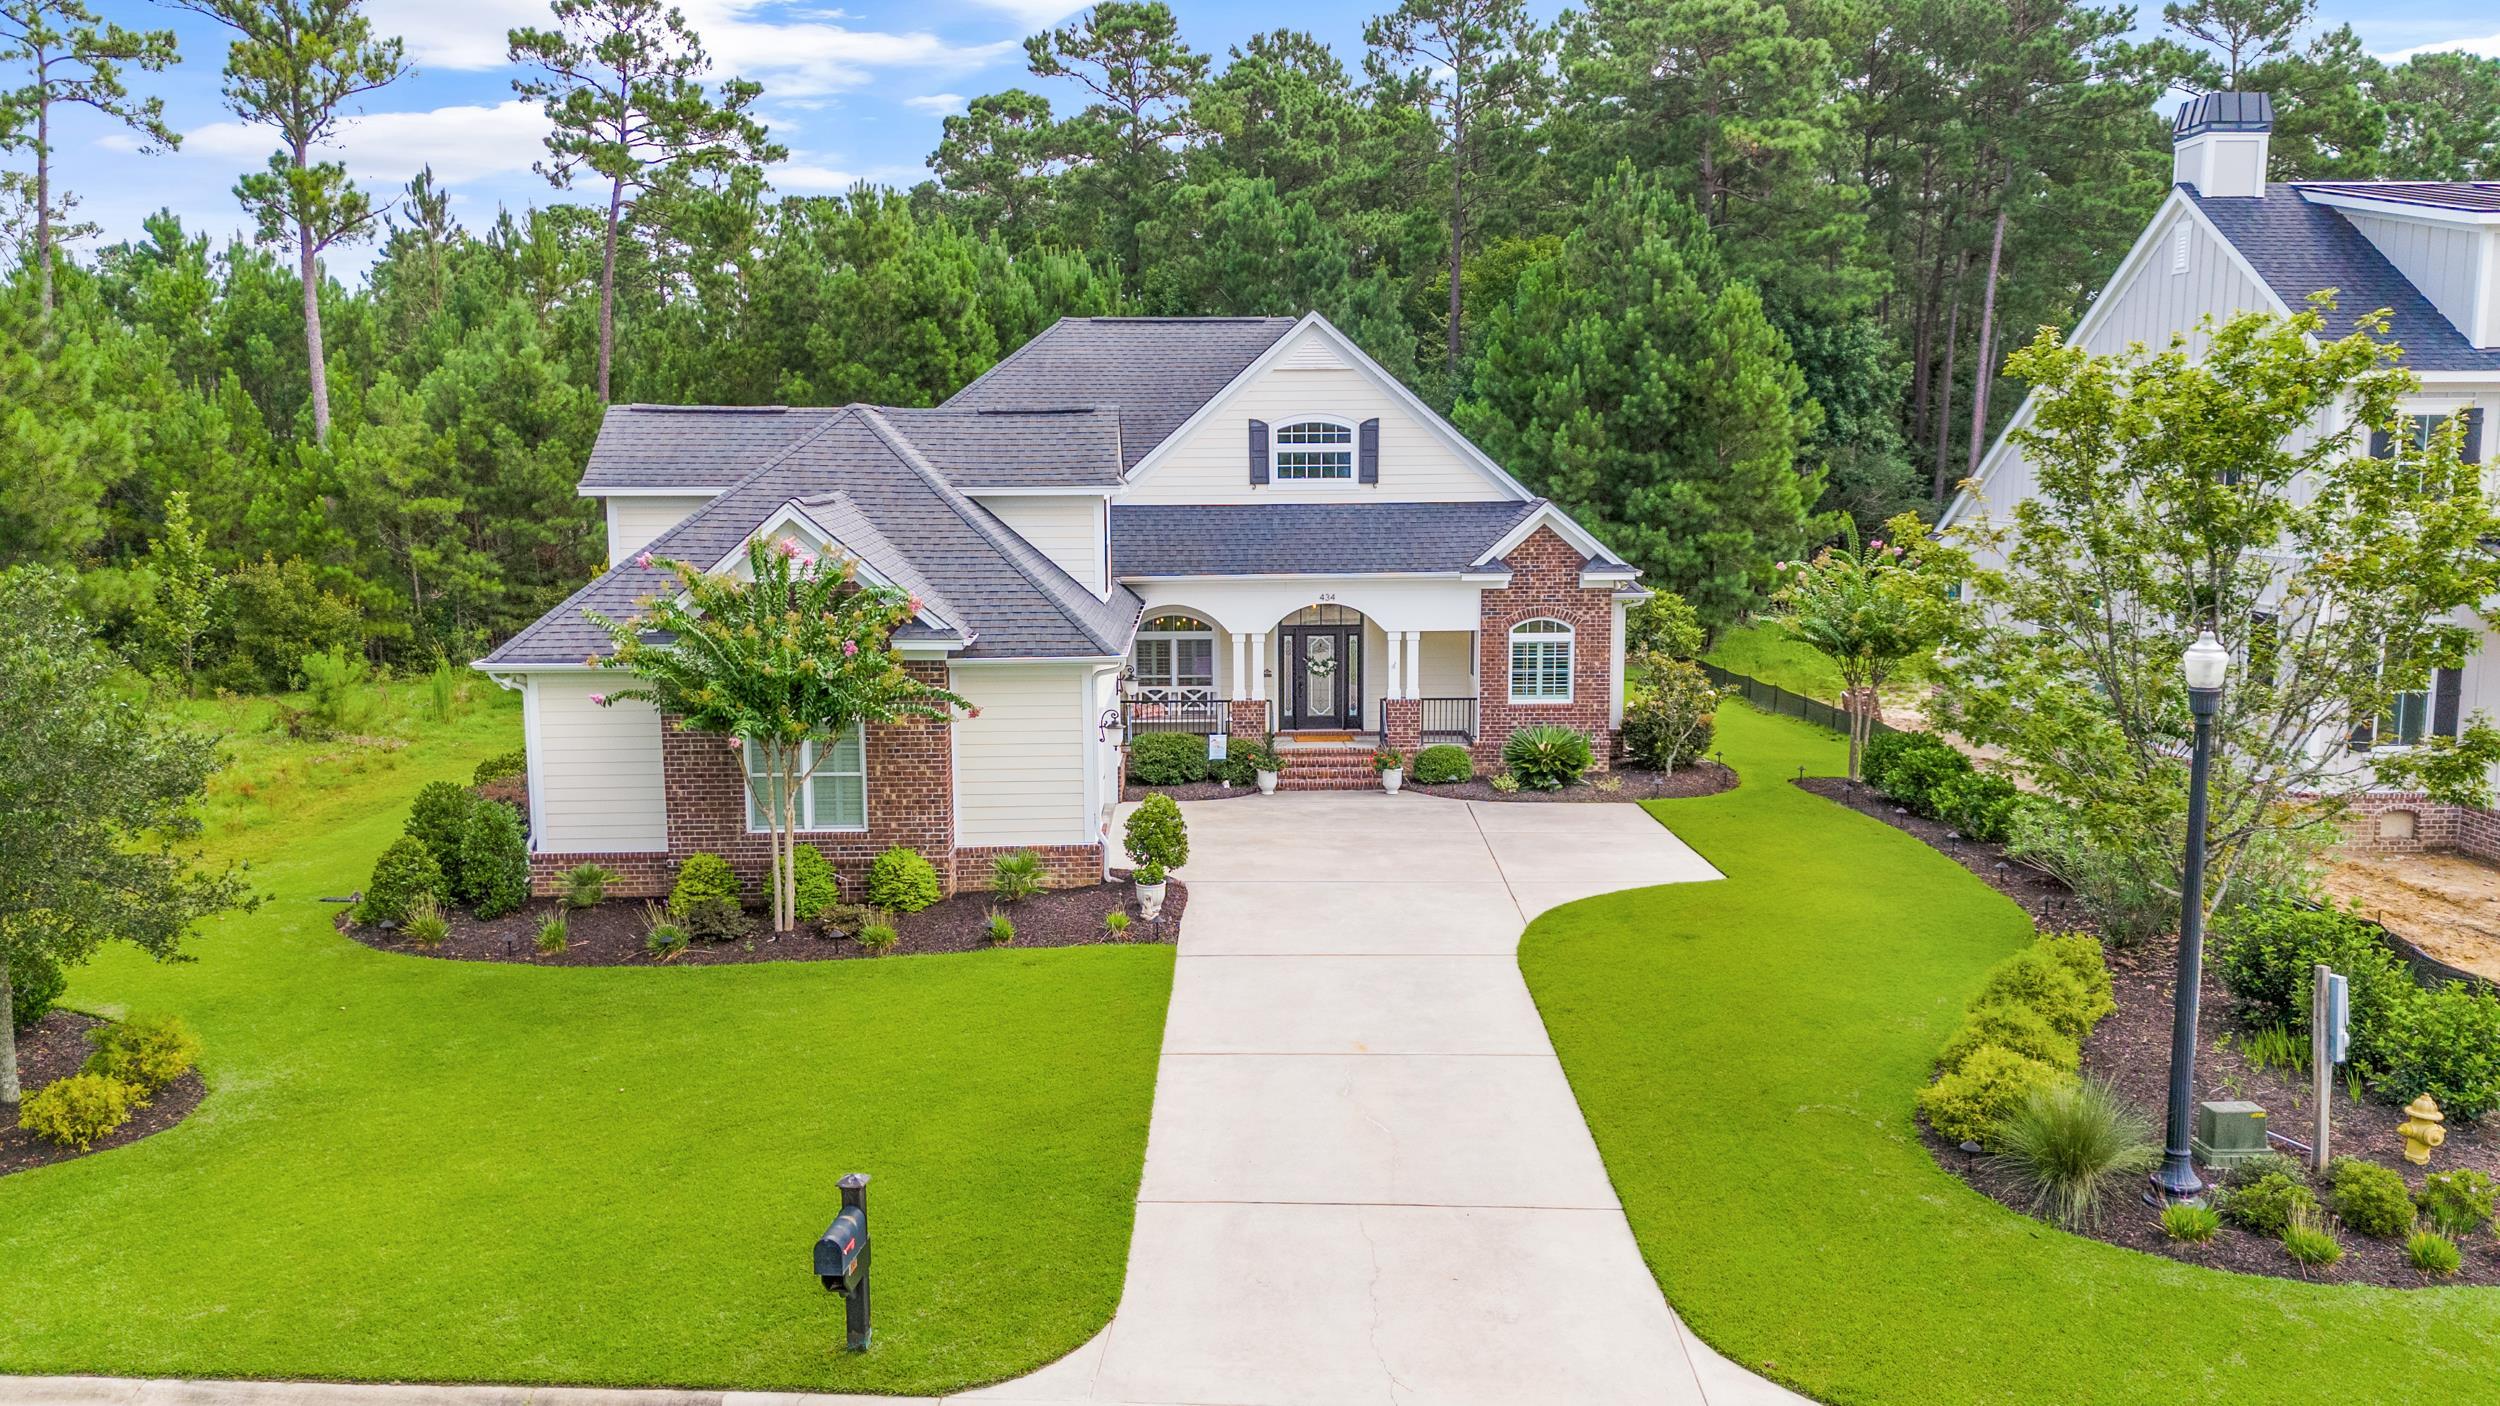 434 Woody Point Dr. Murrells Inlet, SC 29576